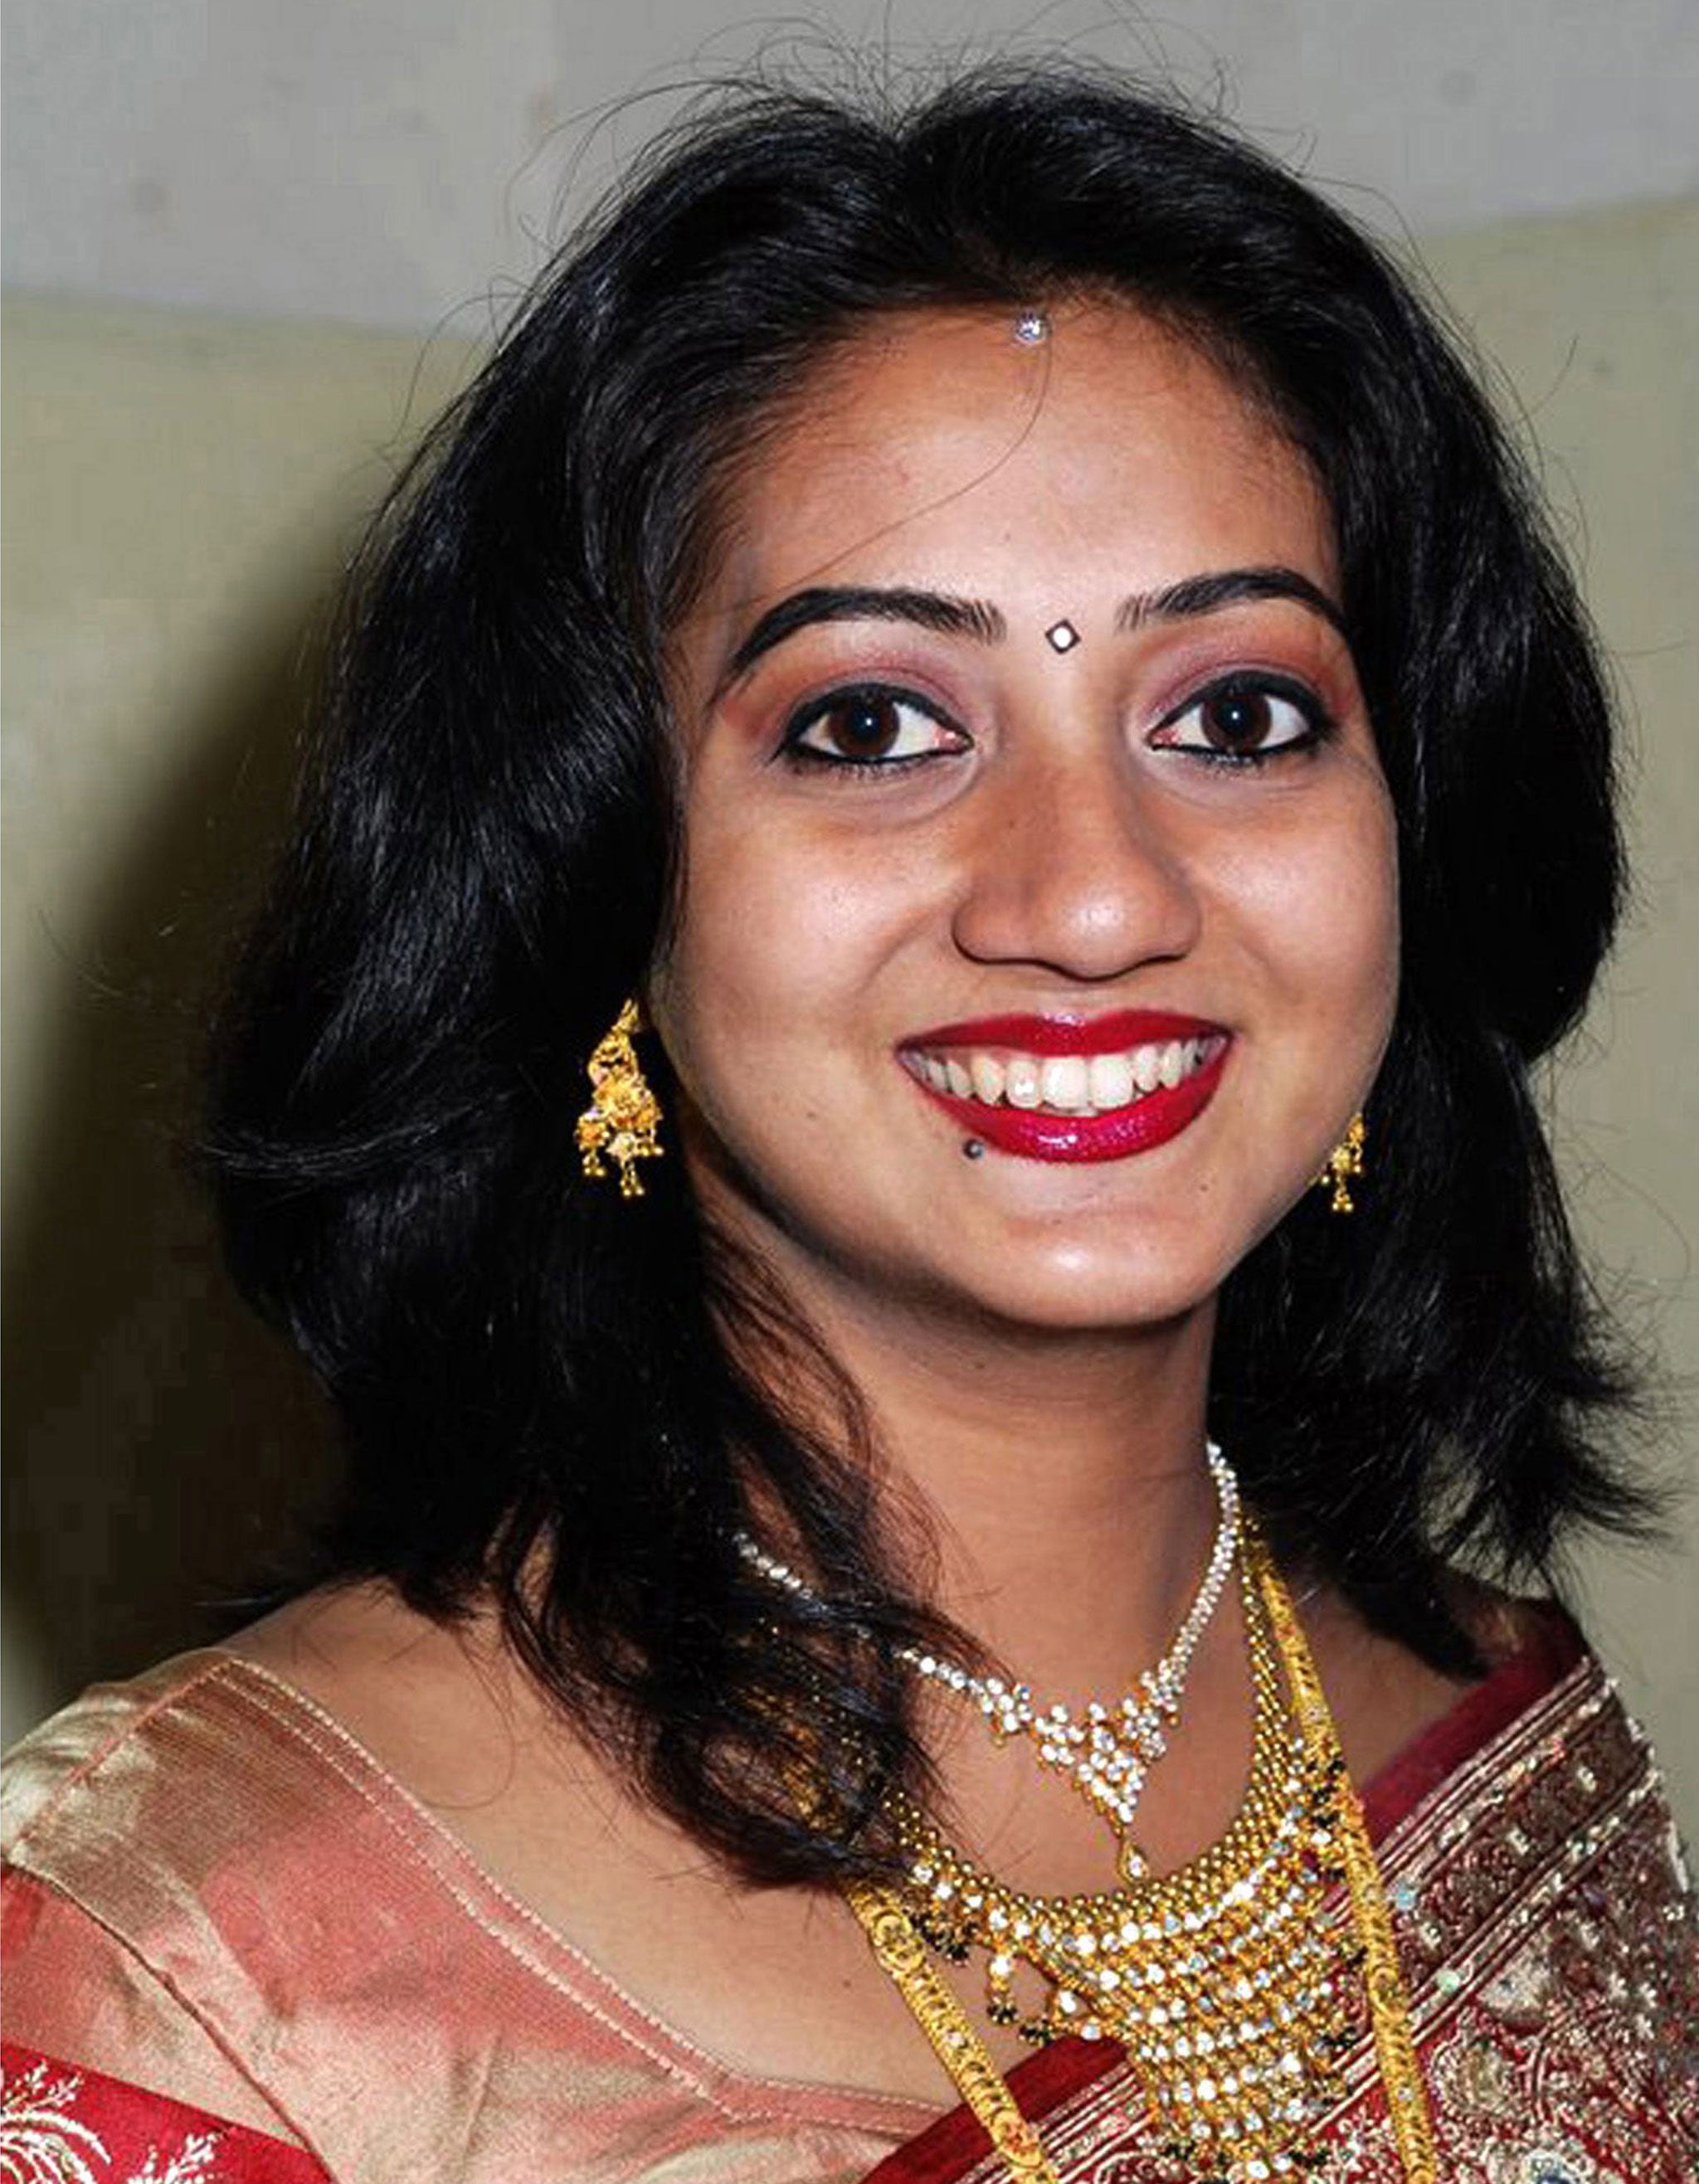 Savita Halappanavar, who was 17 weeks pregnant and suffering a miscarriage and septicaemia, died in hospital after being refused an abortion